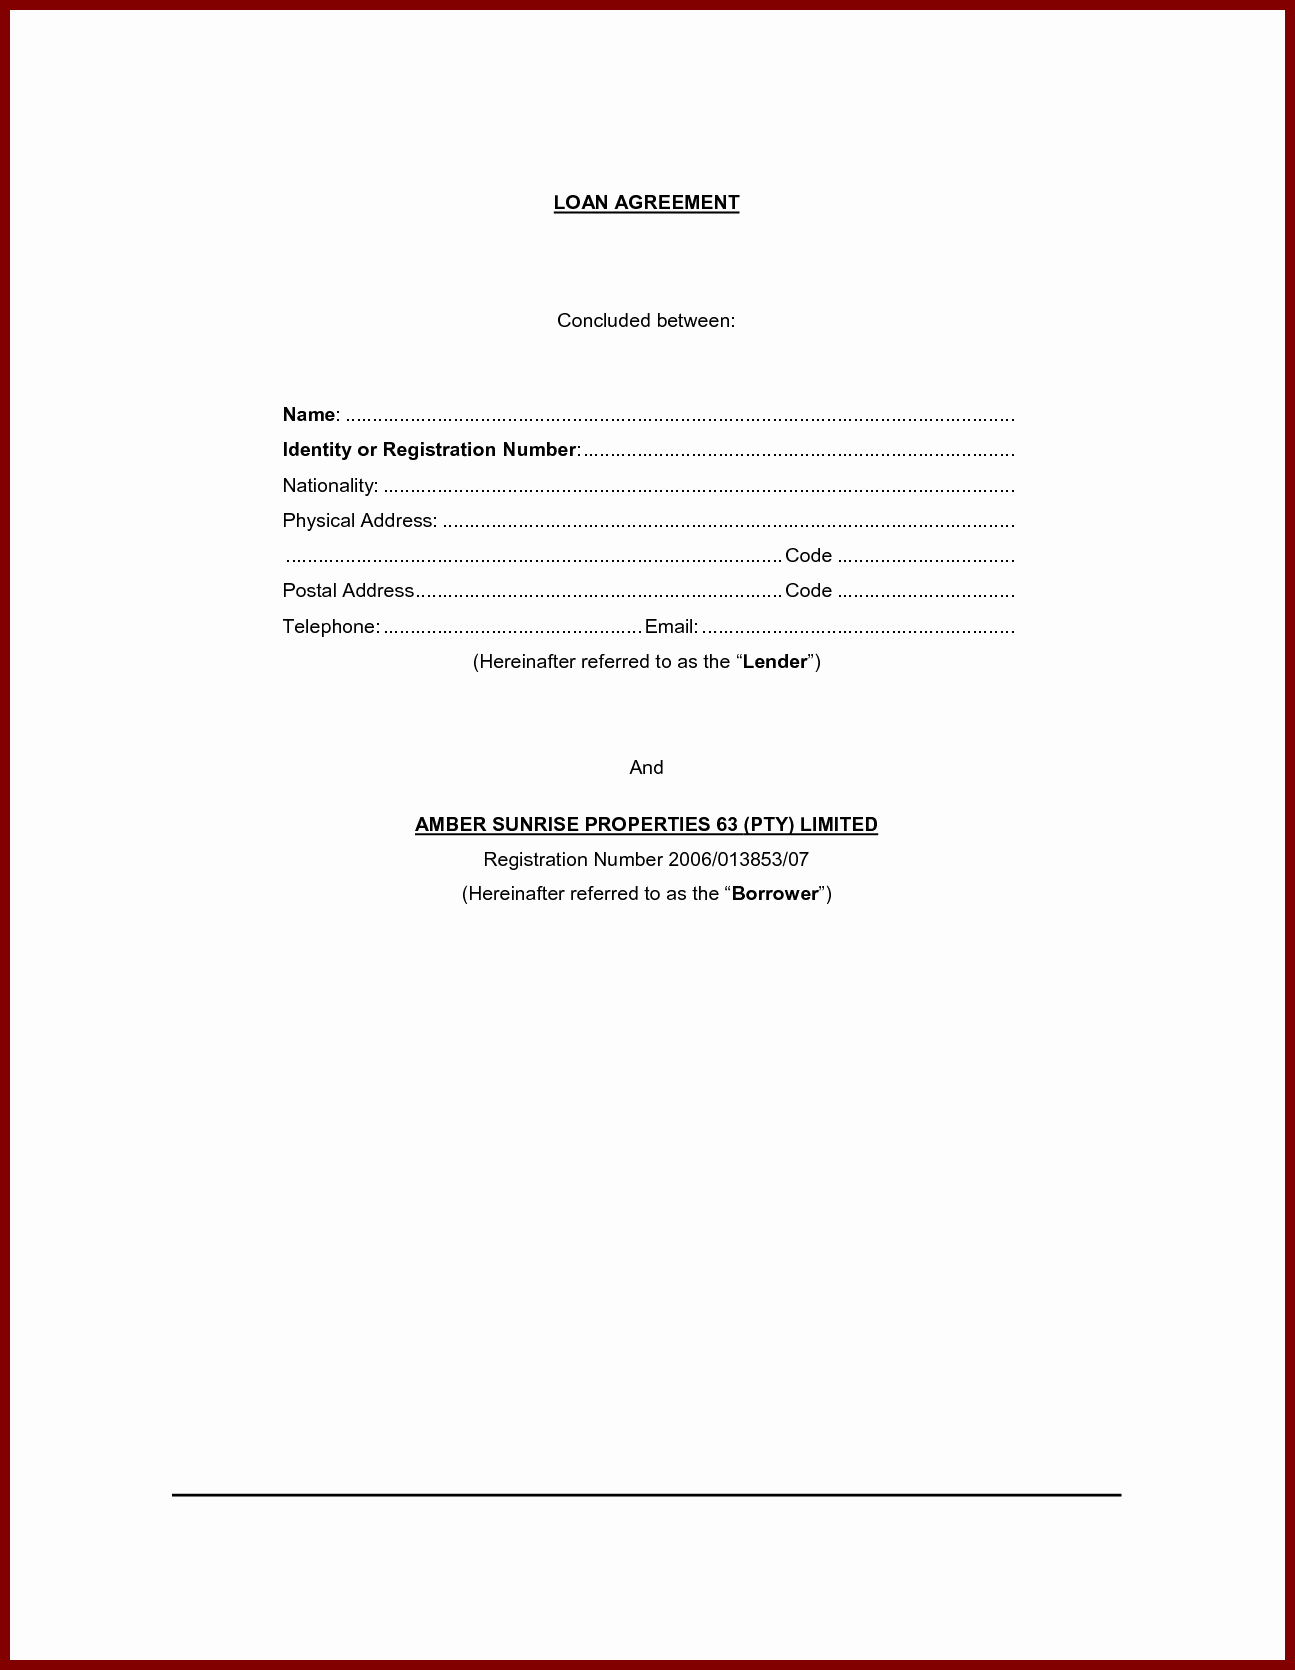 Personal Loan Agreement Template Free Awesome Personal Loan Contract Agreement form Sample Vatansun